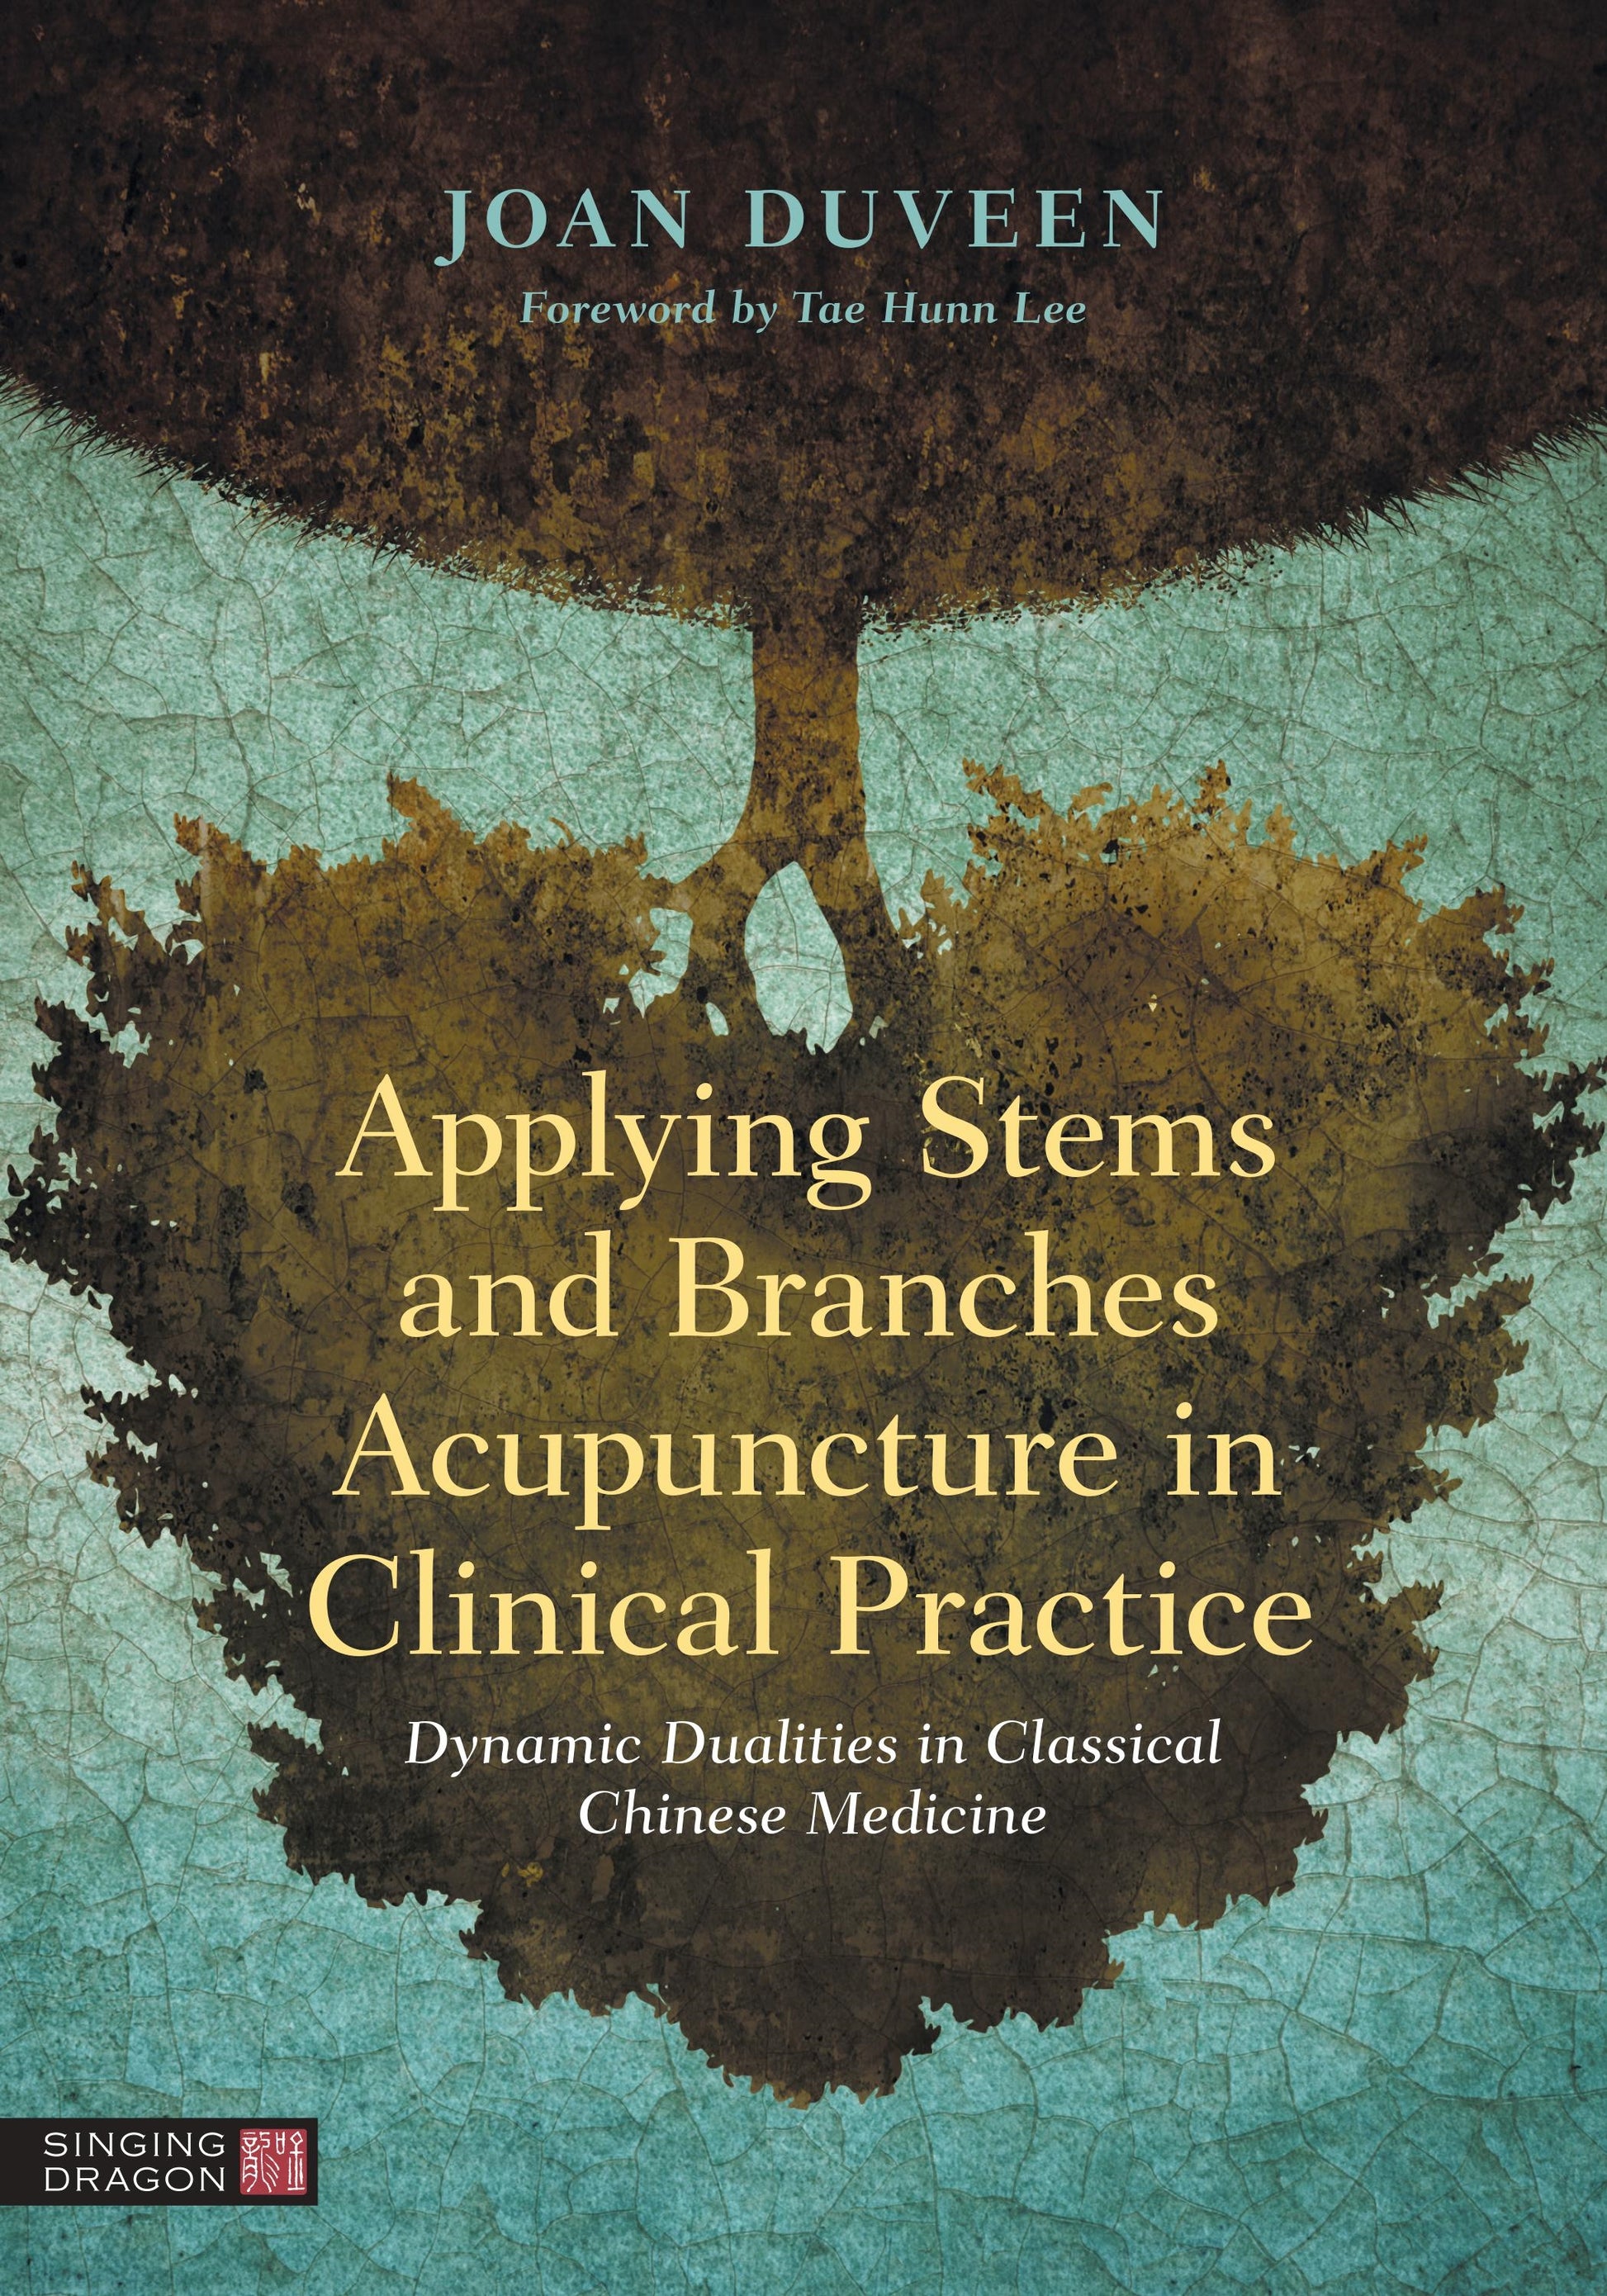 Applying Stems and Branches Acupuncture in Clinical Practice by Tae Hunn Lee, Joan Duveen